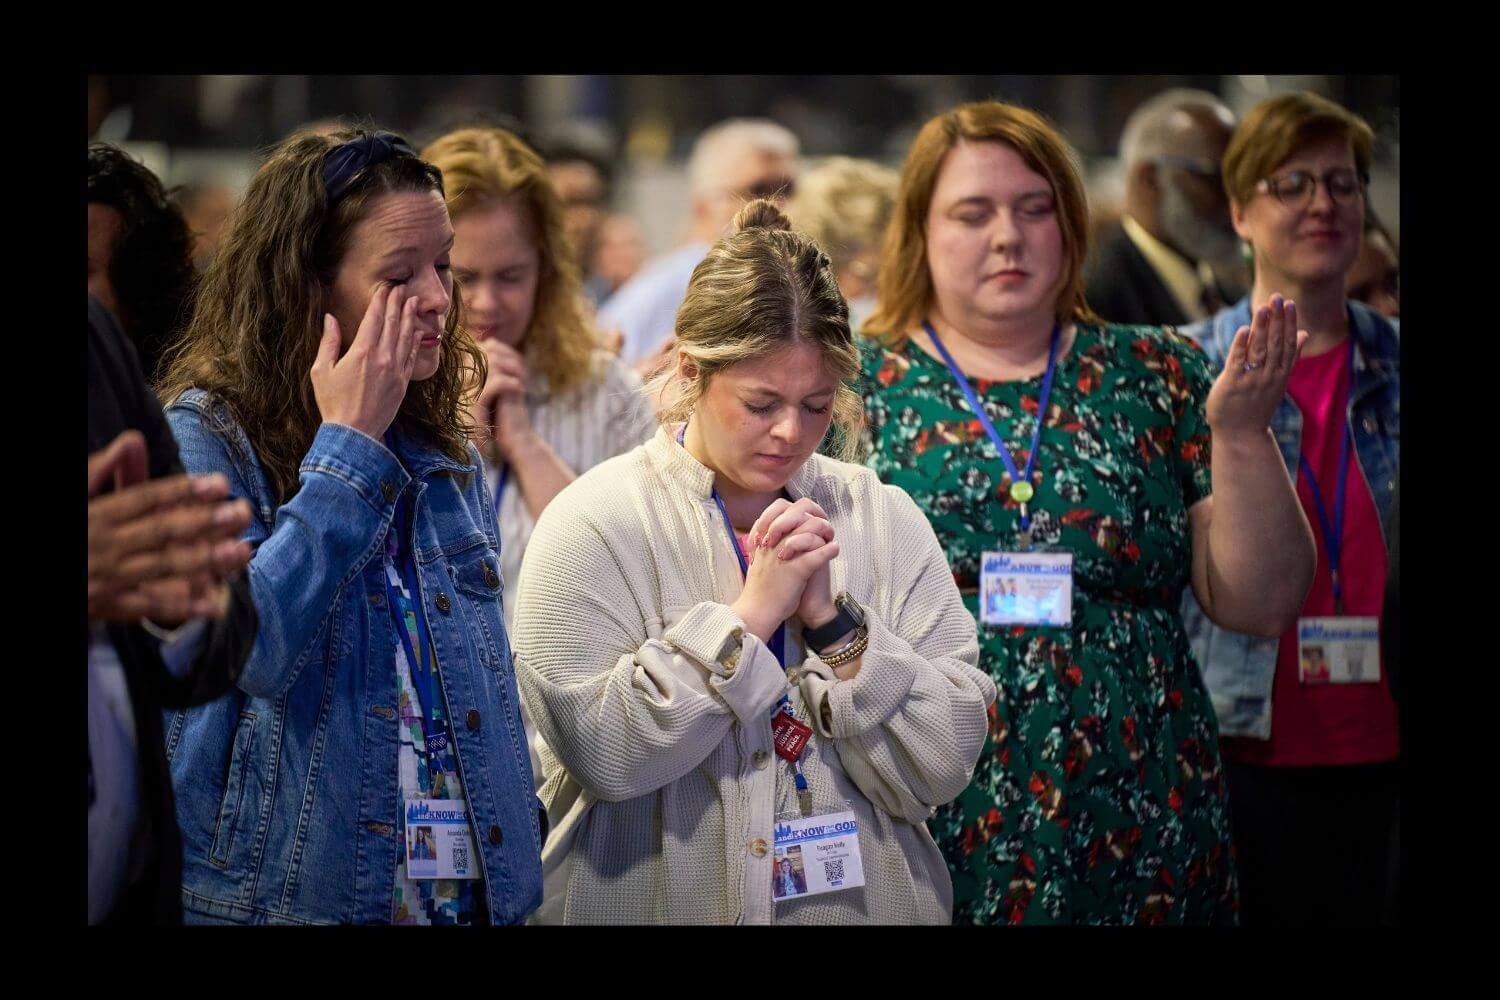 Prayer at the postponed 2020 General Conference